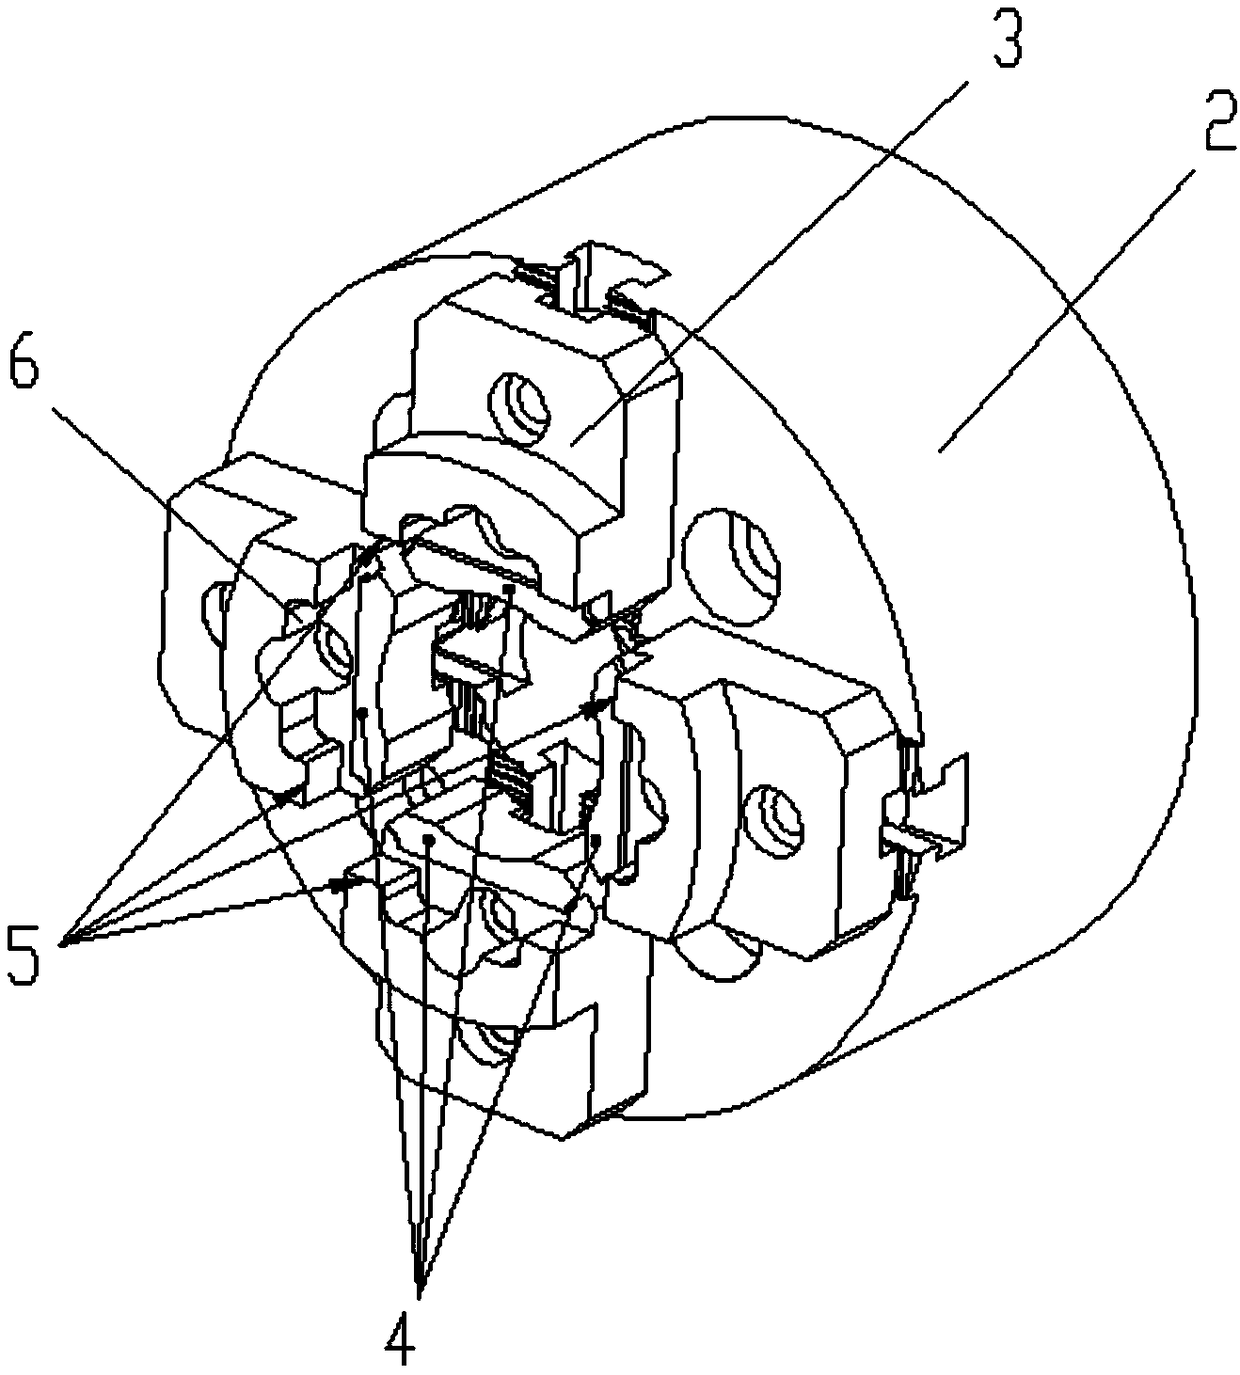 Four-jaw chuck for preventing workpiece deformation